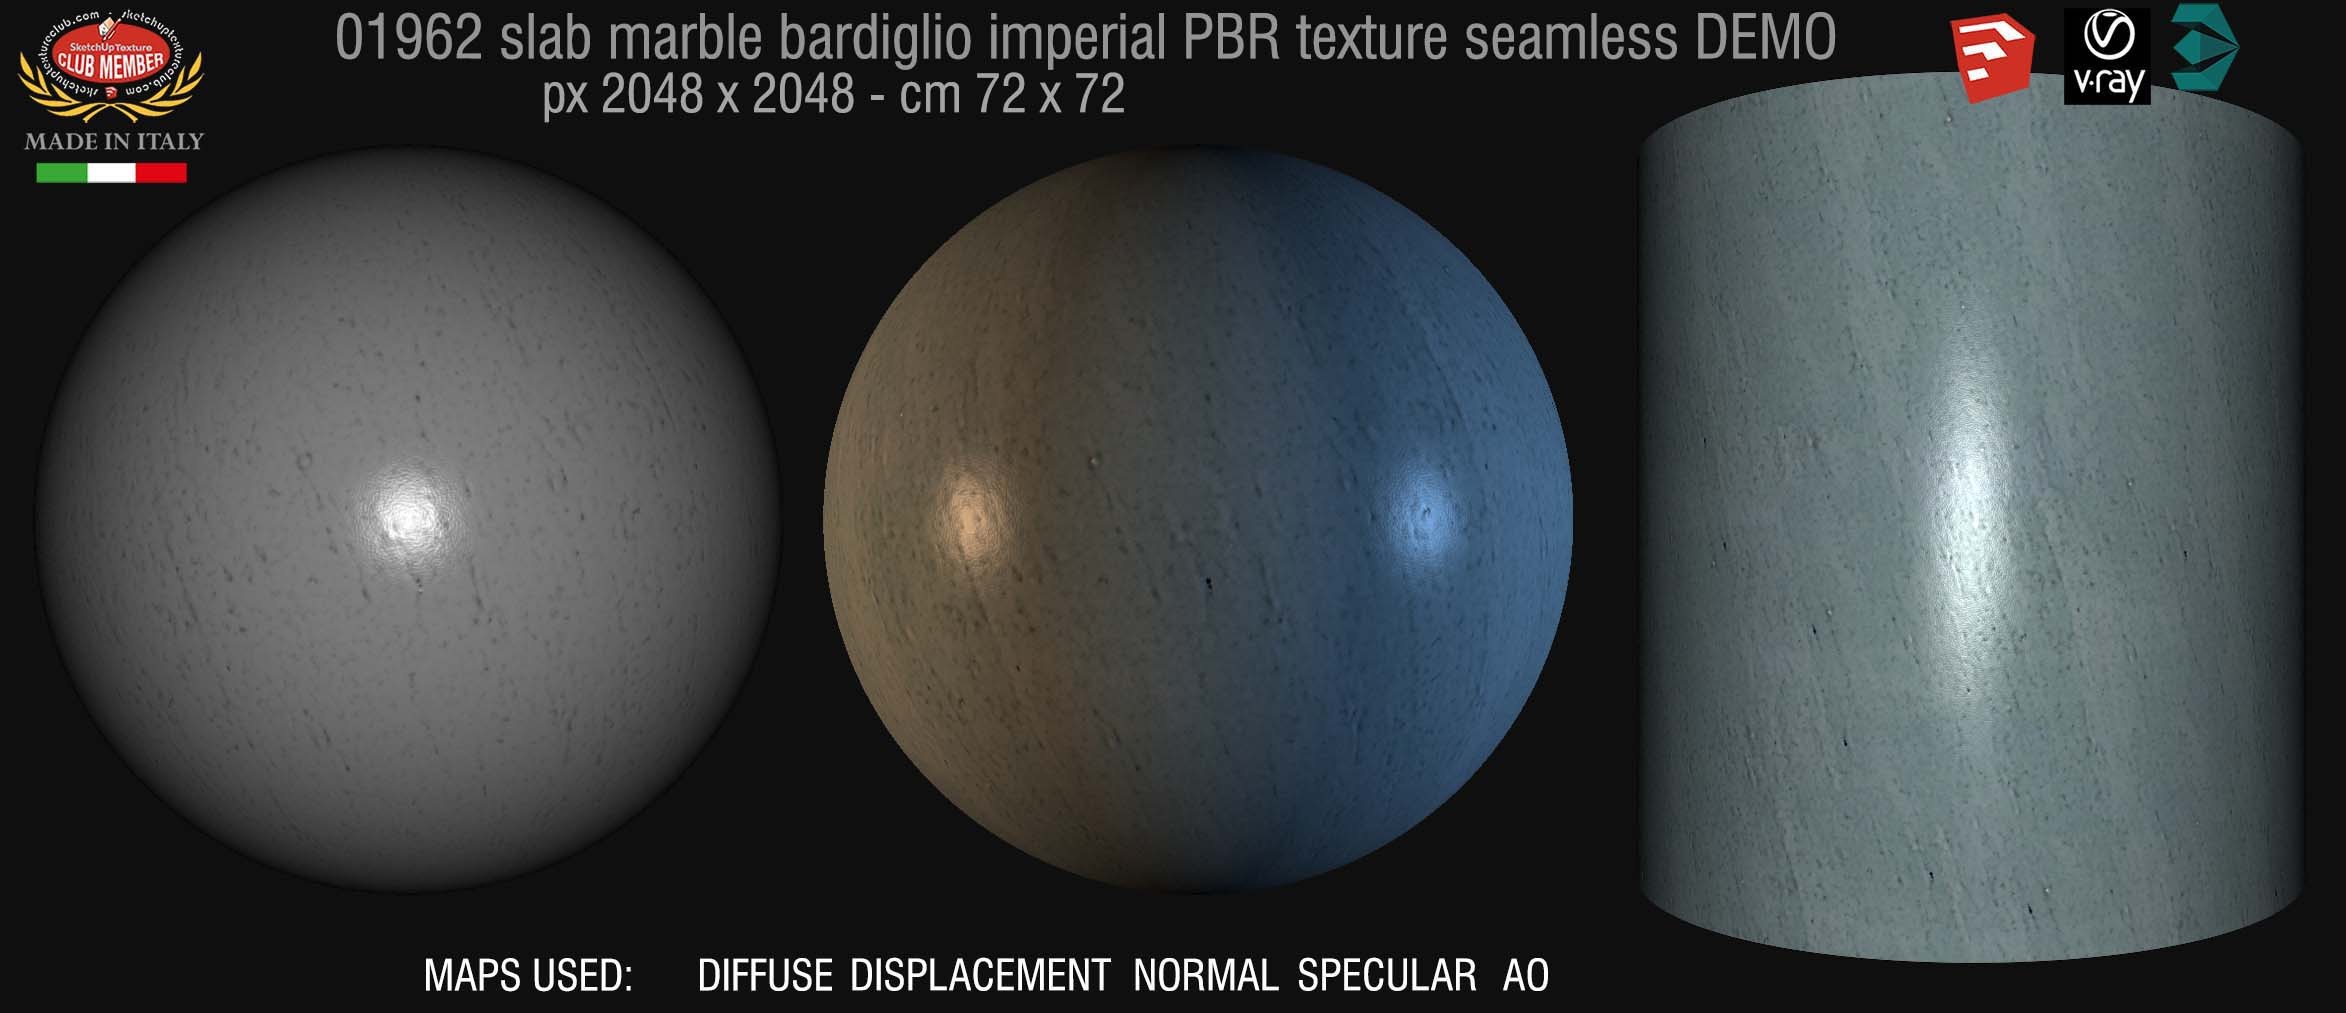 01962 slab marble bardiglio imperial texture seamless DEMO